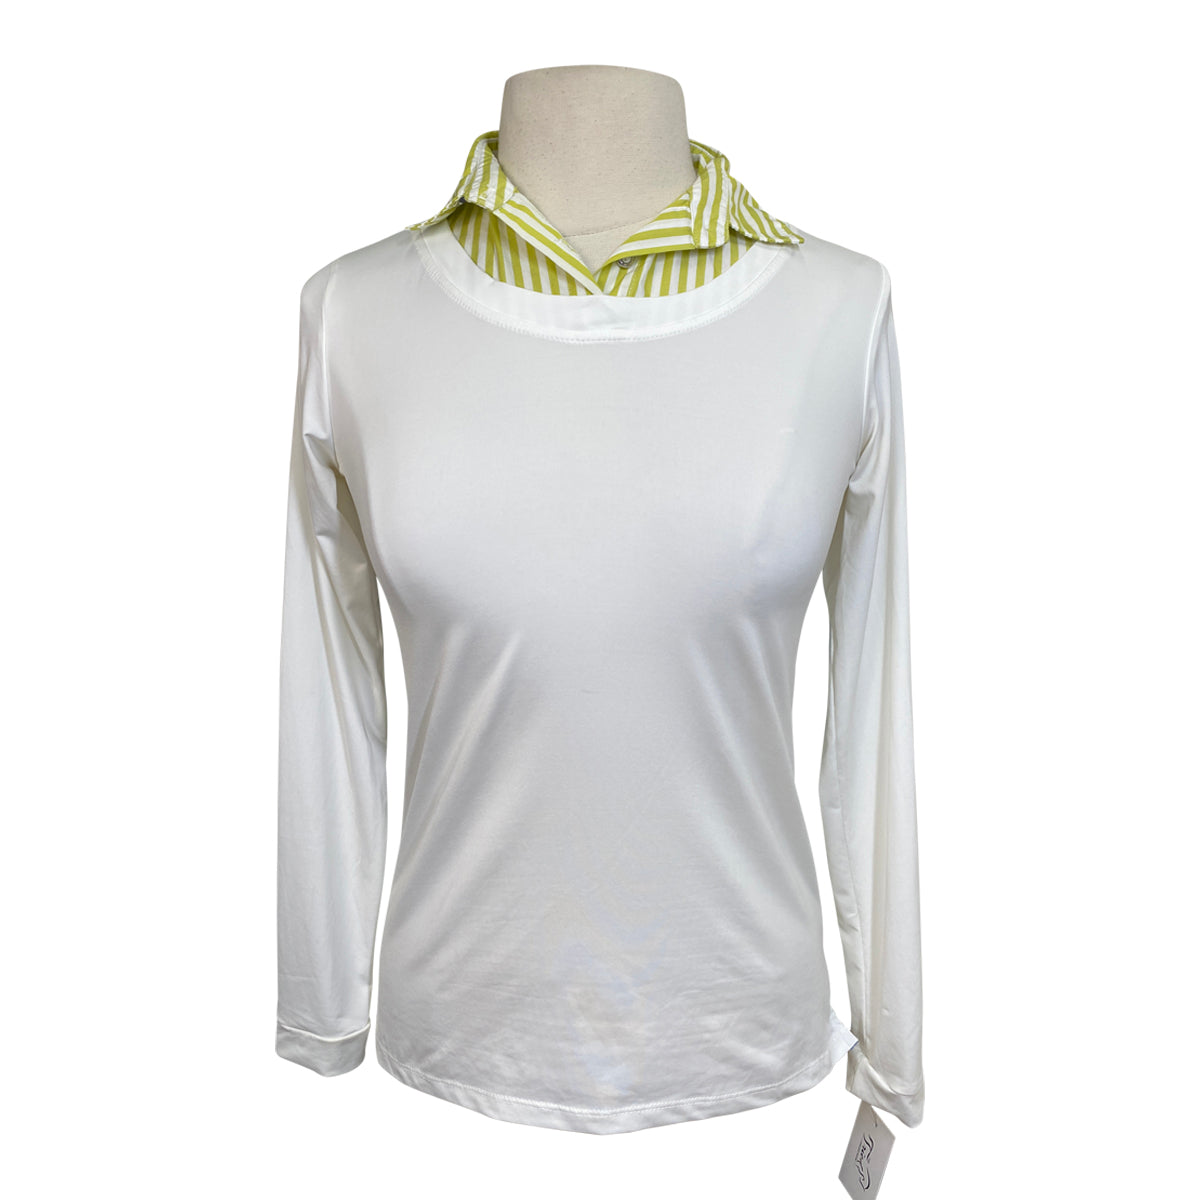 Callidae Practice Shirt in White/Chartreuse Stripe